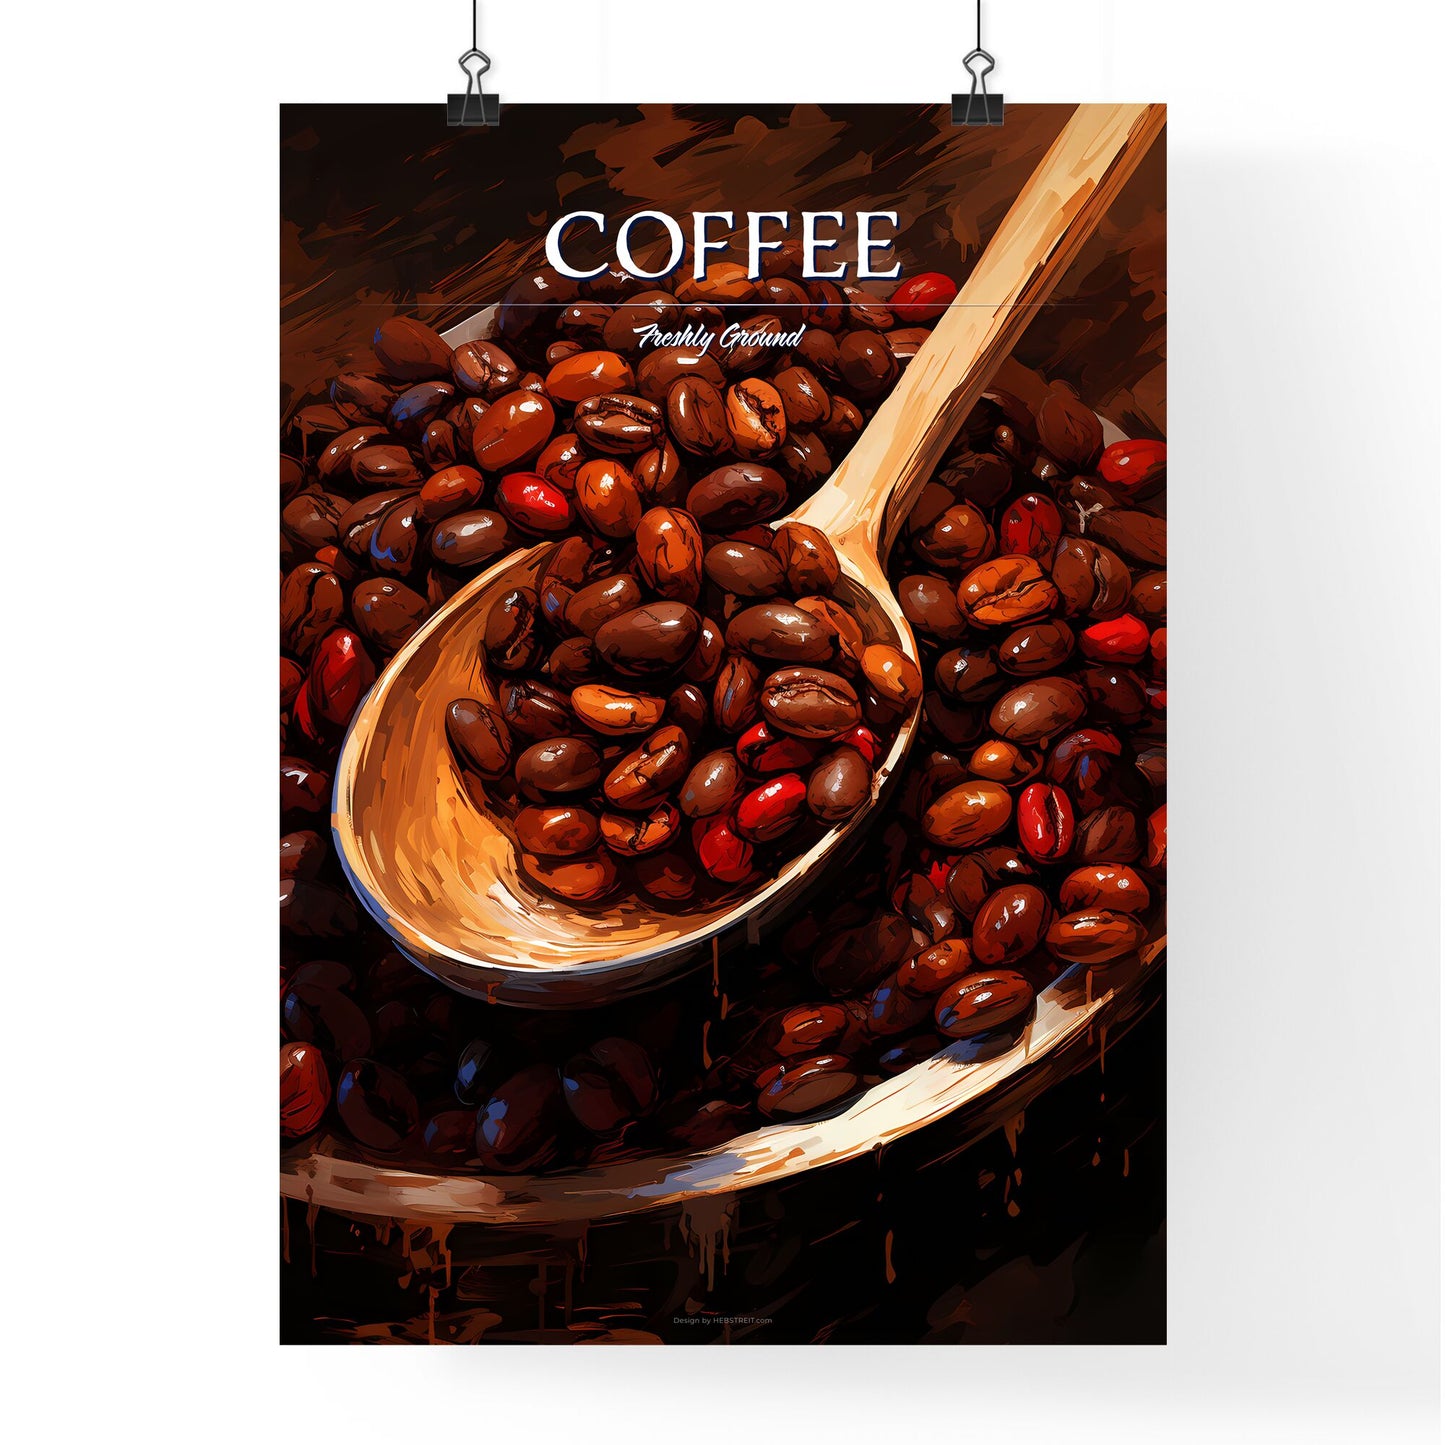 Closeup Of Coffee Beans With Scoop In Mood Lighting - A Bowl Of Beans With A Wooden Spoon Default Title